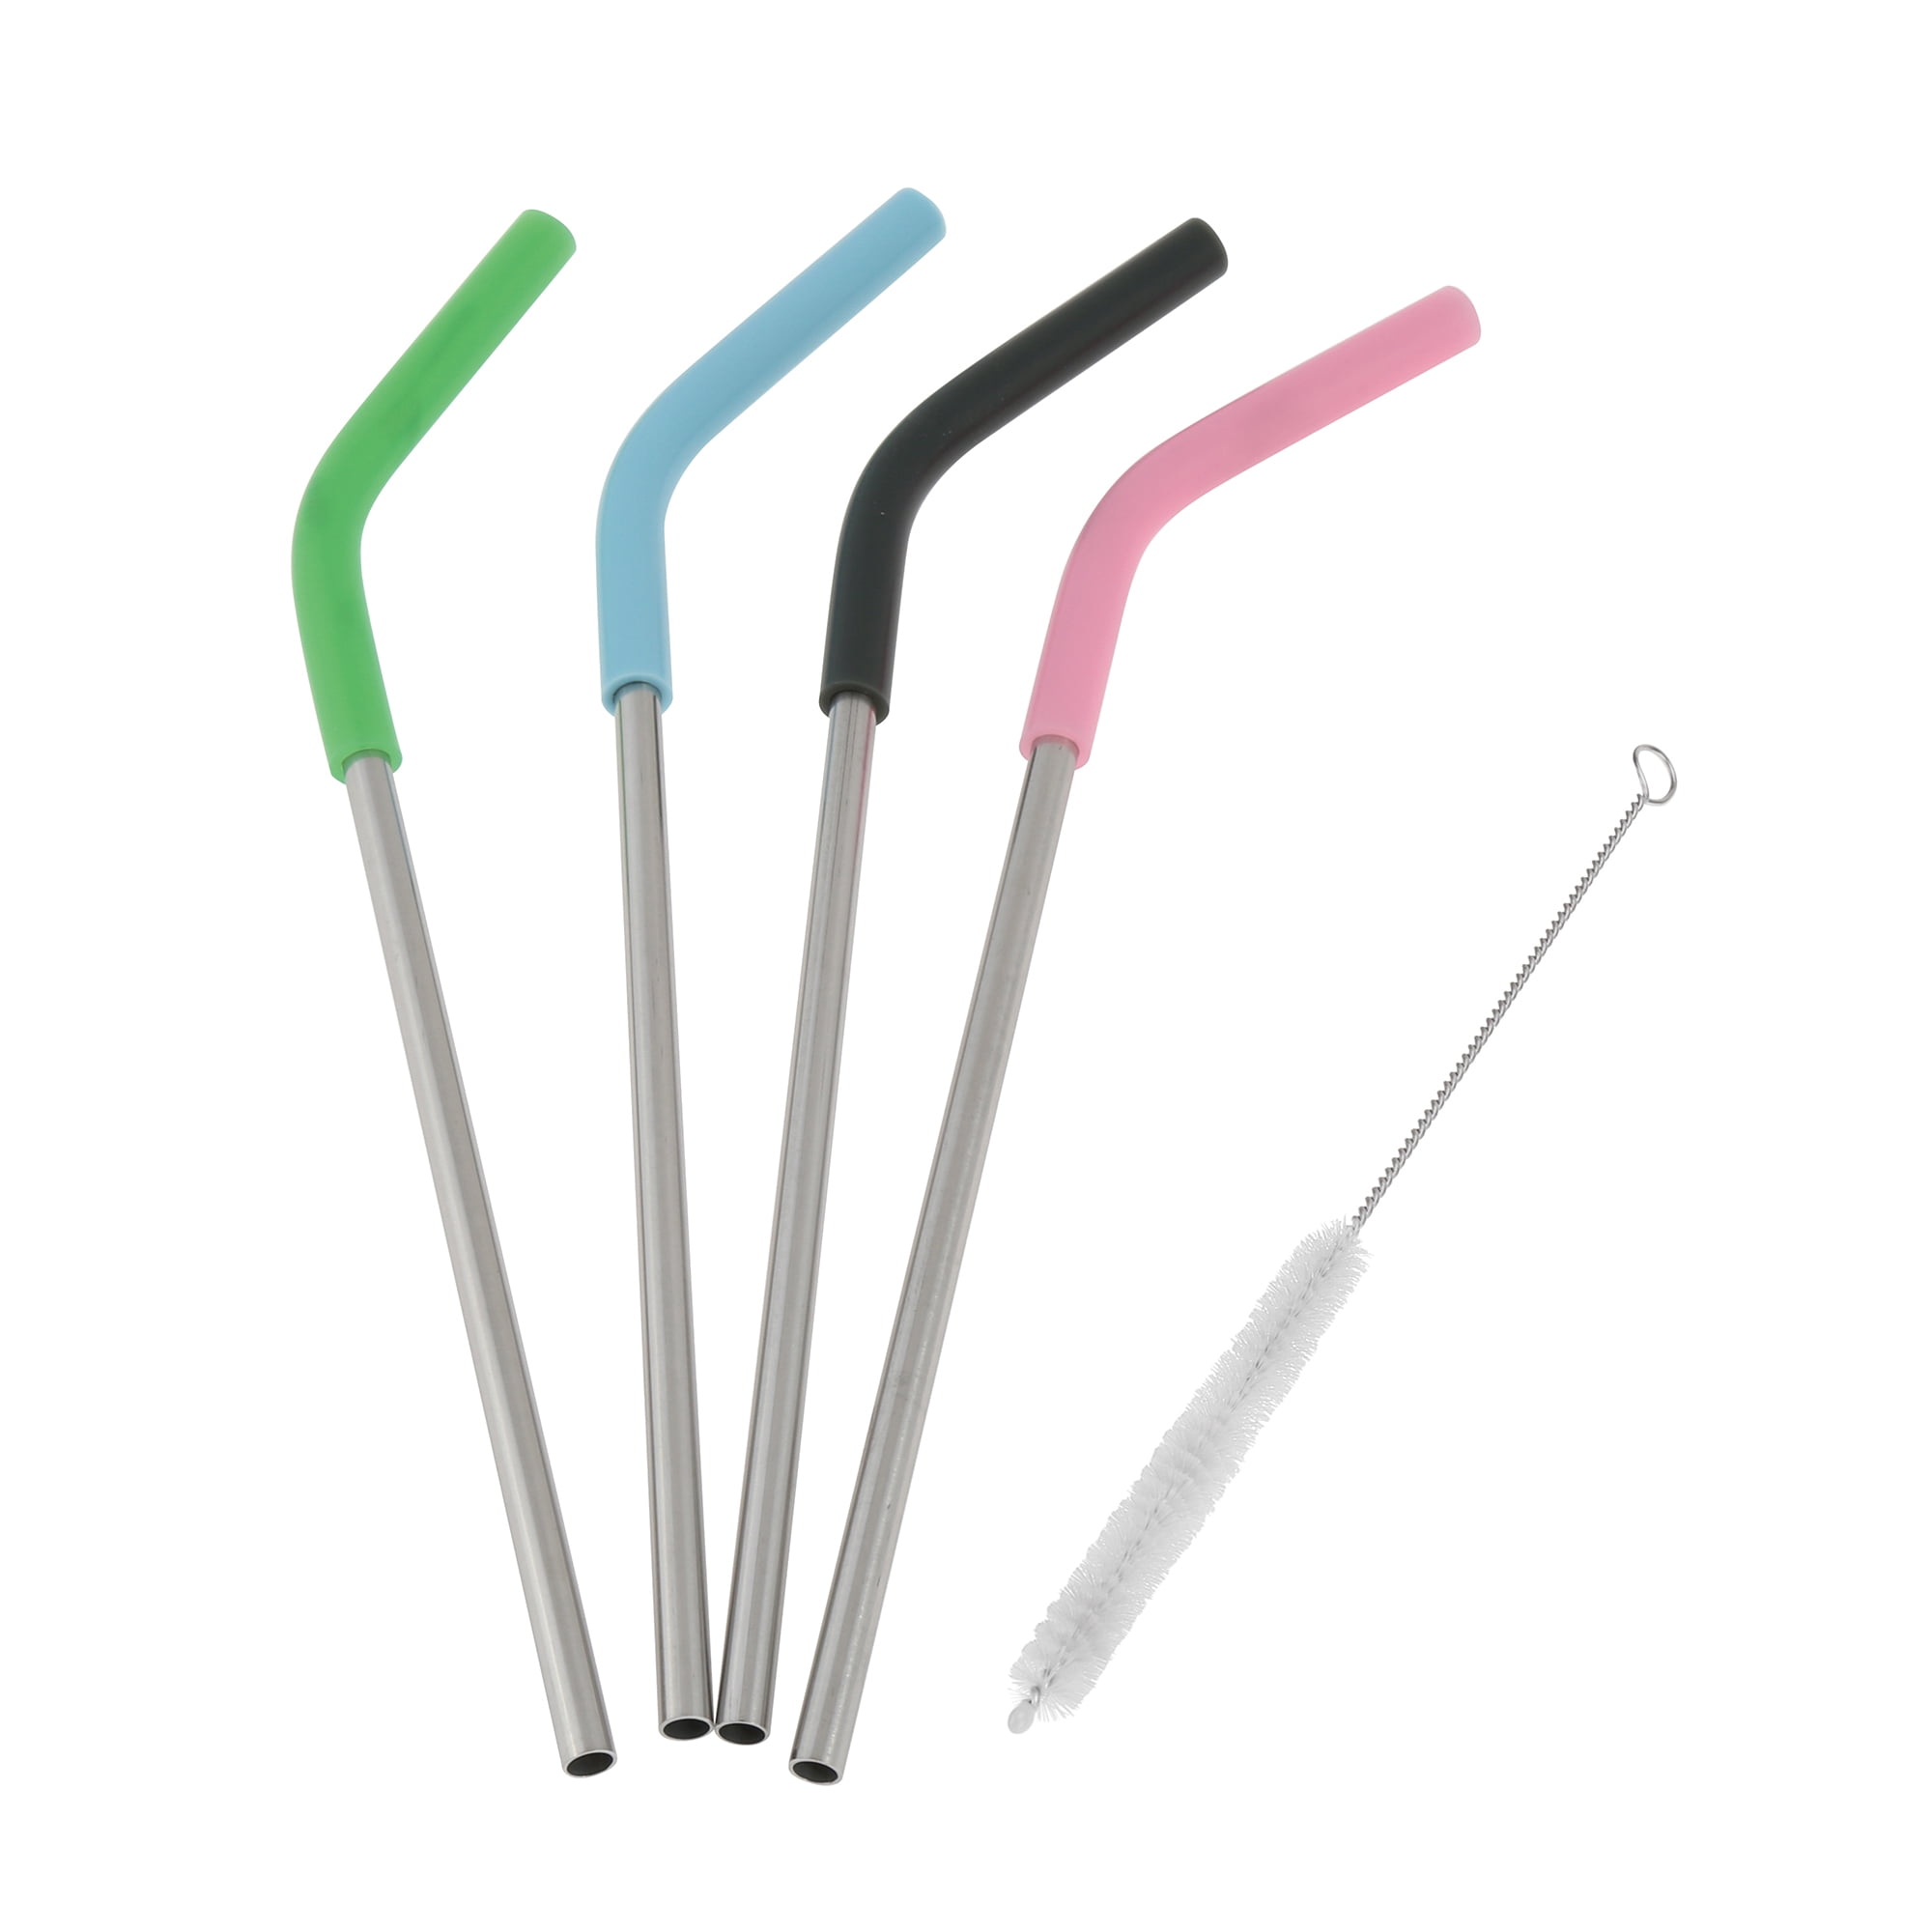 SAMOKA Anti Wrinkle Straw, 4PCS Reusable Stainless Steel Anti Wrinkle  Drinking Straw,Wrinkle Free Straw（Equipped with 2 brushes）